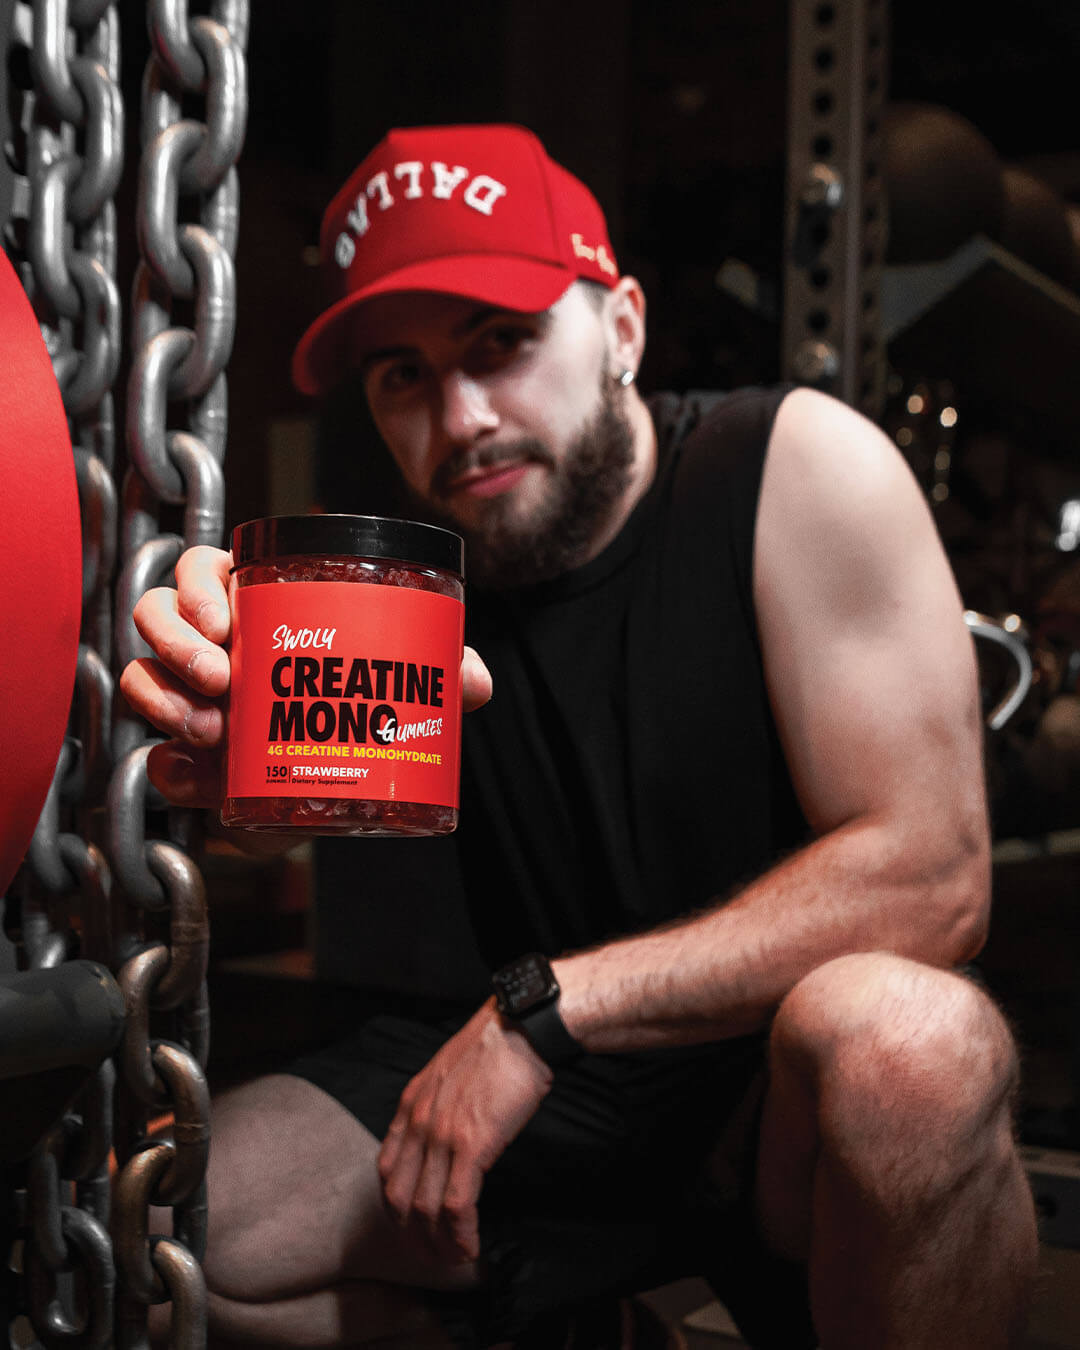 creatine gummies being held in a hand with gym weights in the background, swoly supplements, creatine monohydrate